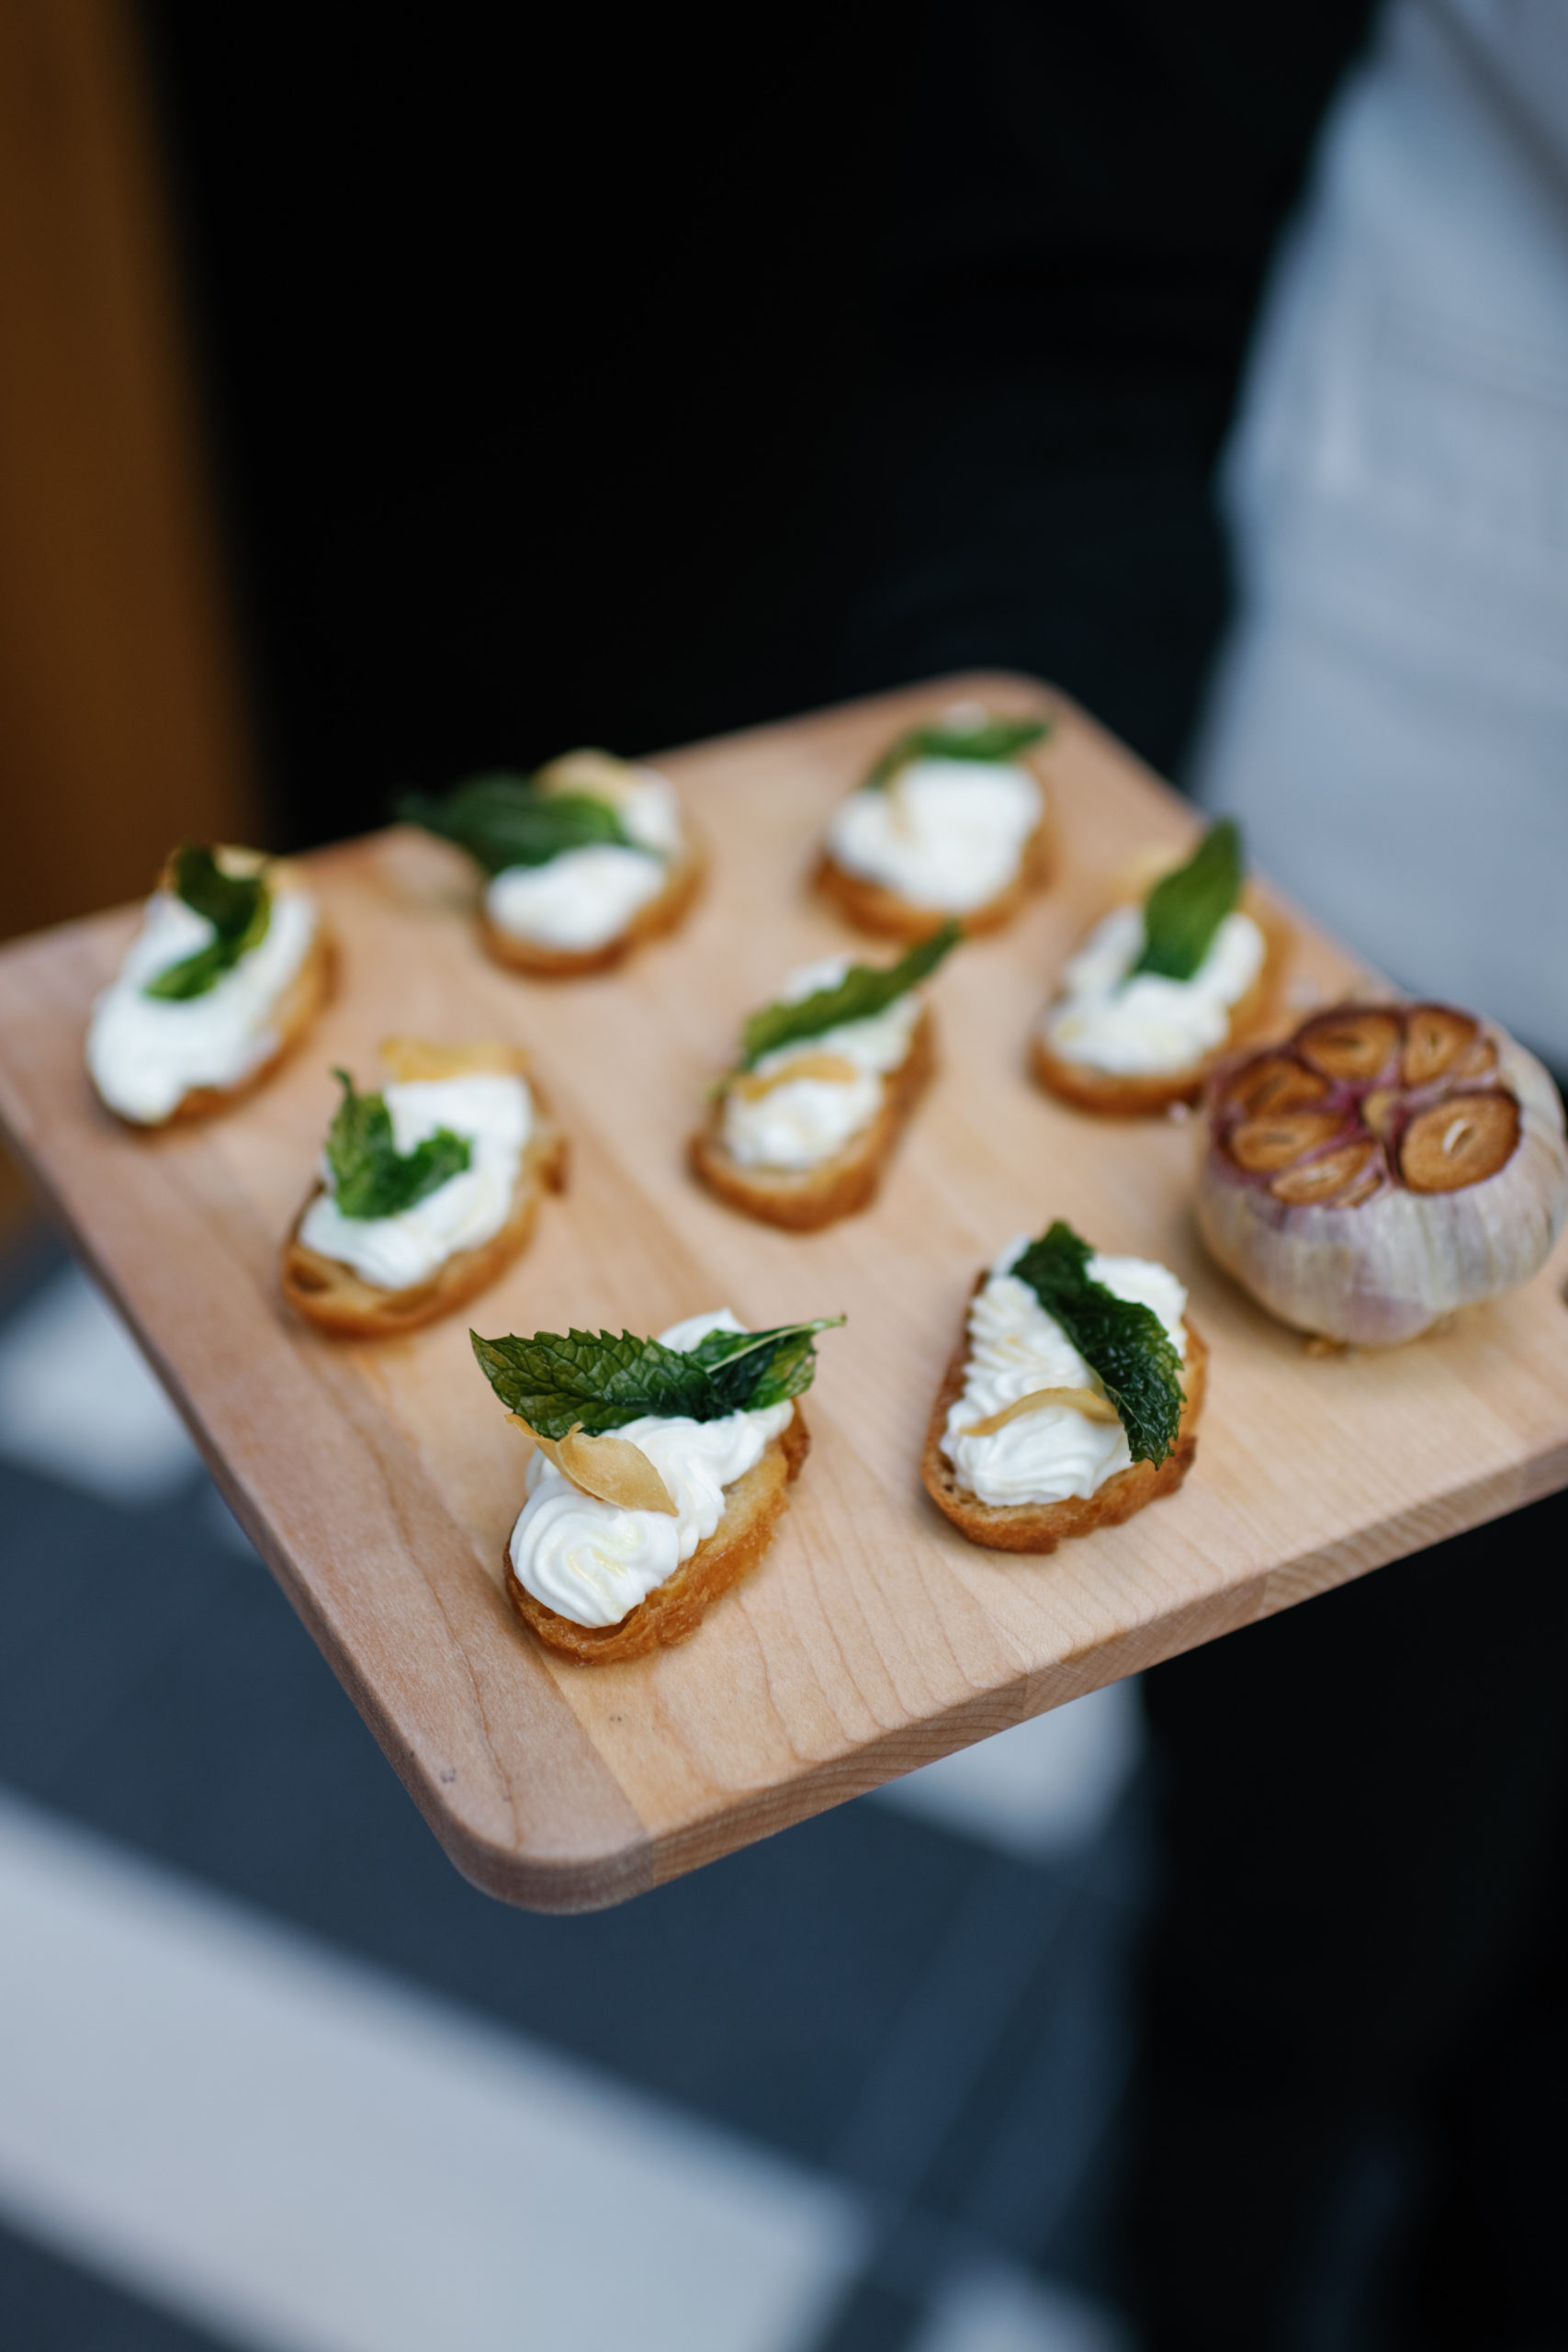 Appetizers at a wedding display